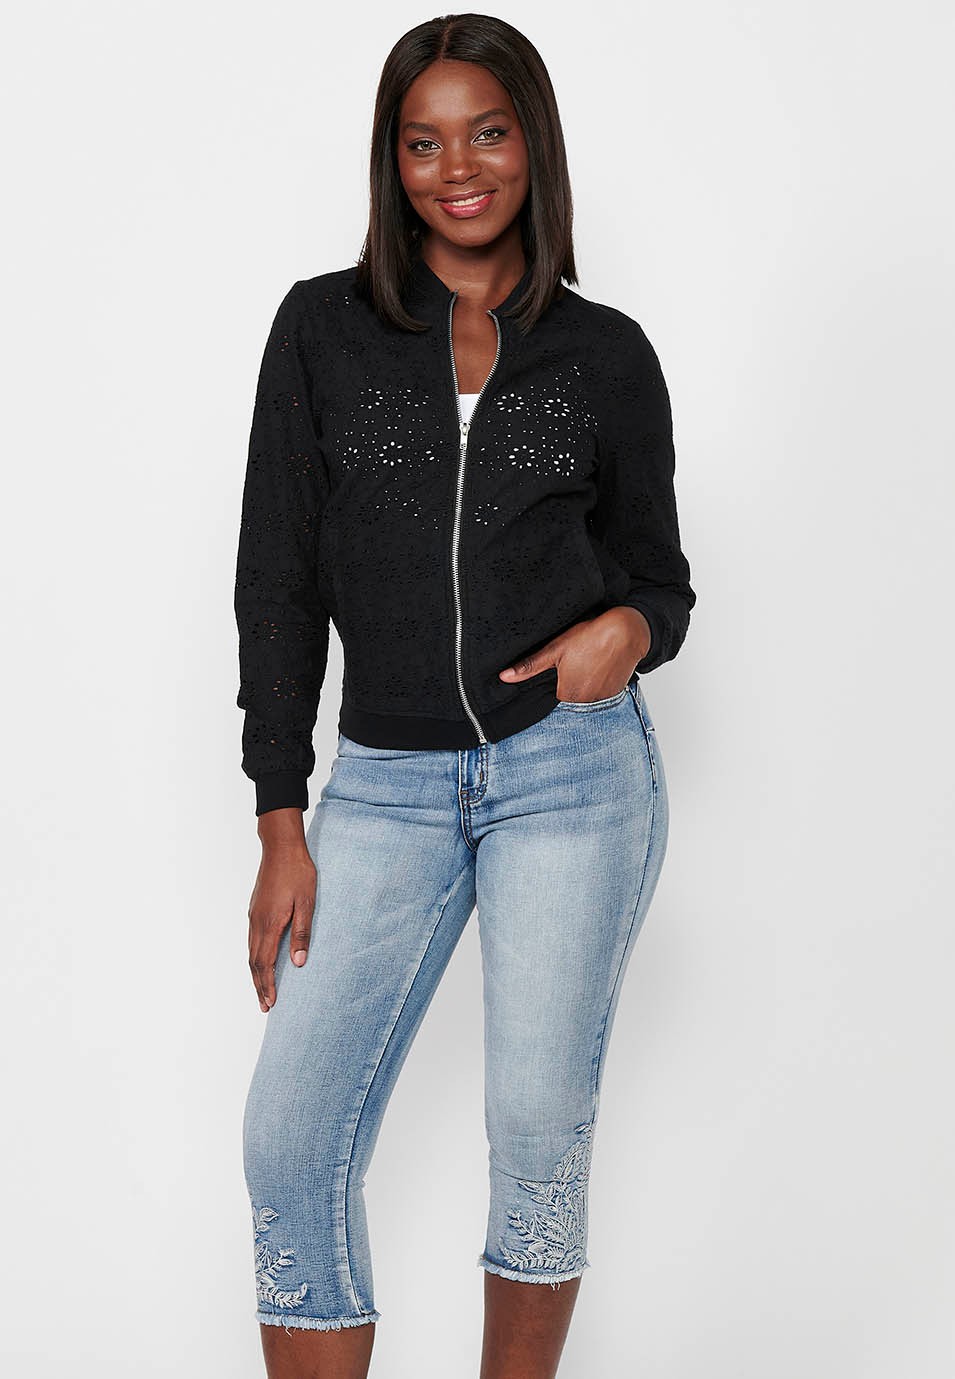 Cotton Sweatshirt with Zipper Front Closure and Rib Finishes with Embroidered Fabric with Floral Motifs and Black Round Neck for Women 2